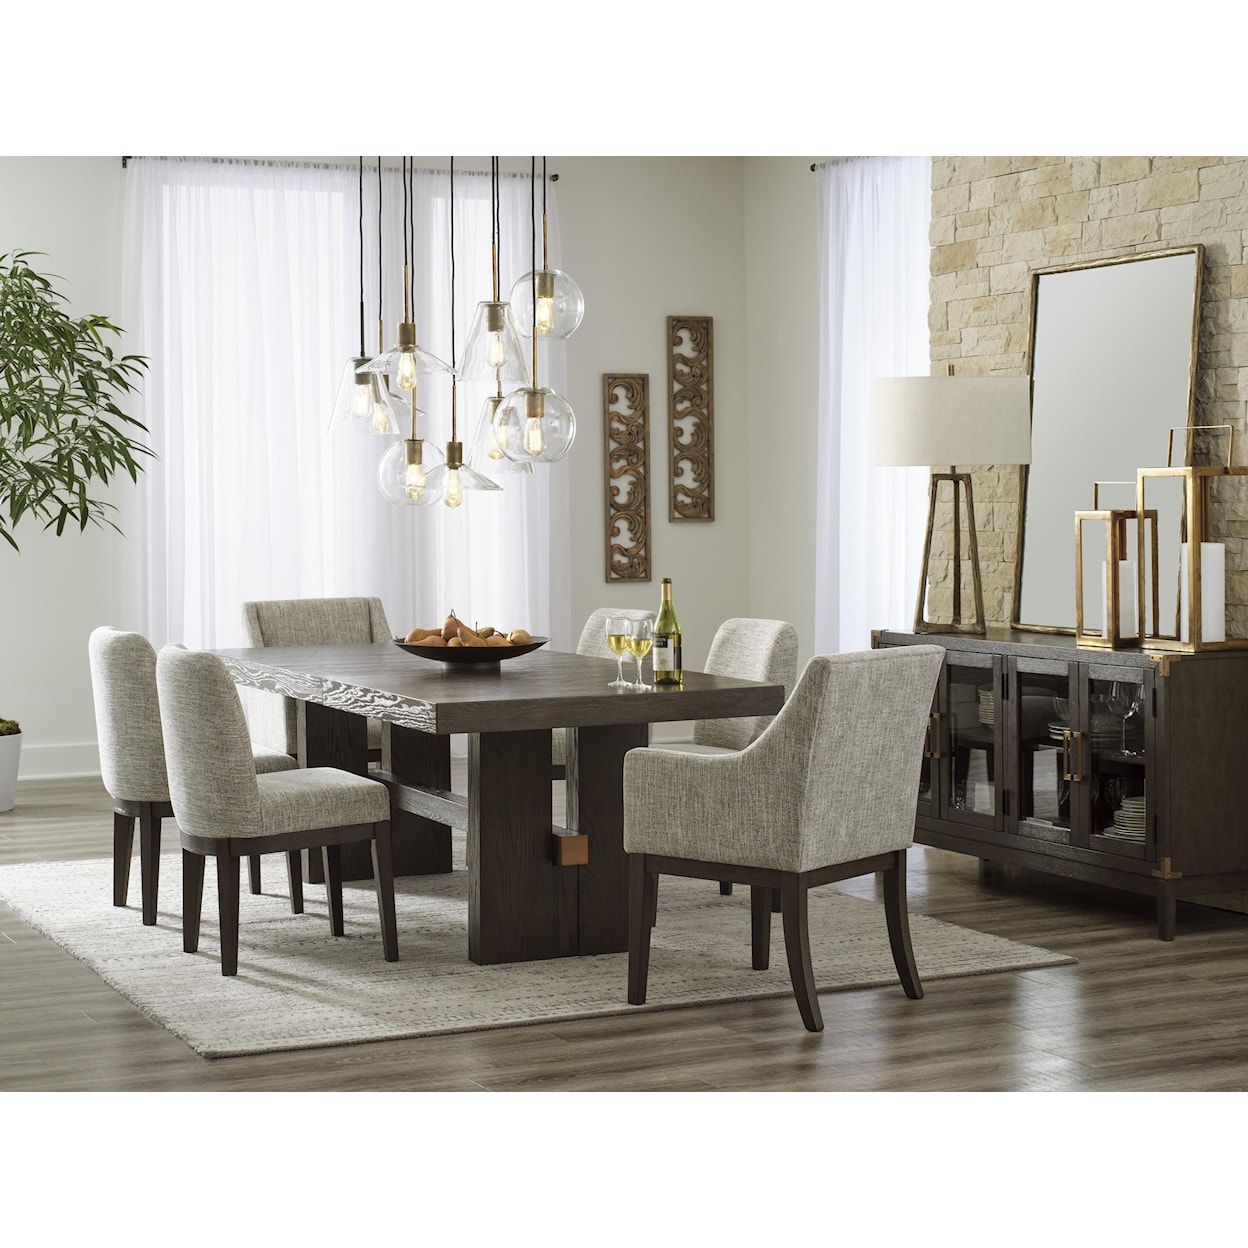 Signature Design by Ashley Burkaus 8PC Dining Room Group